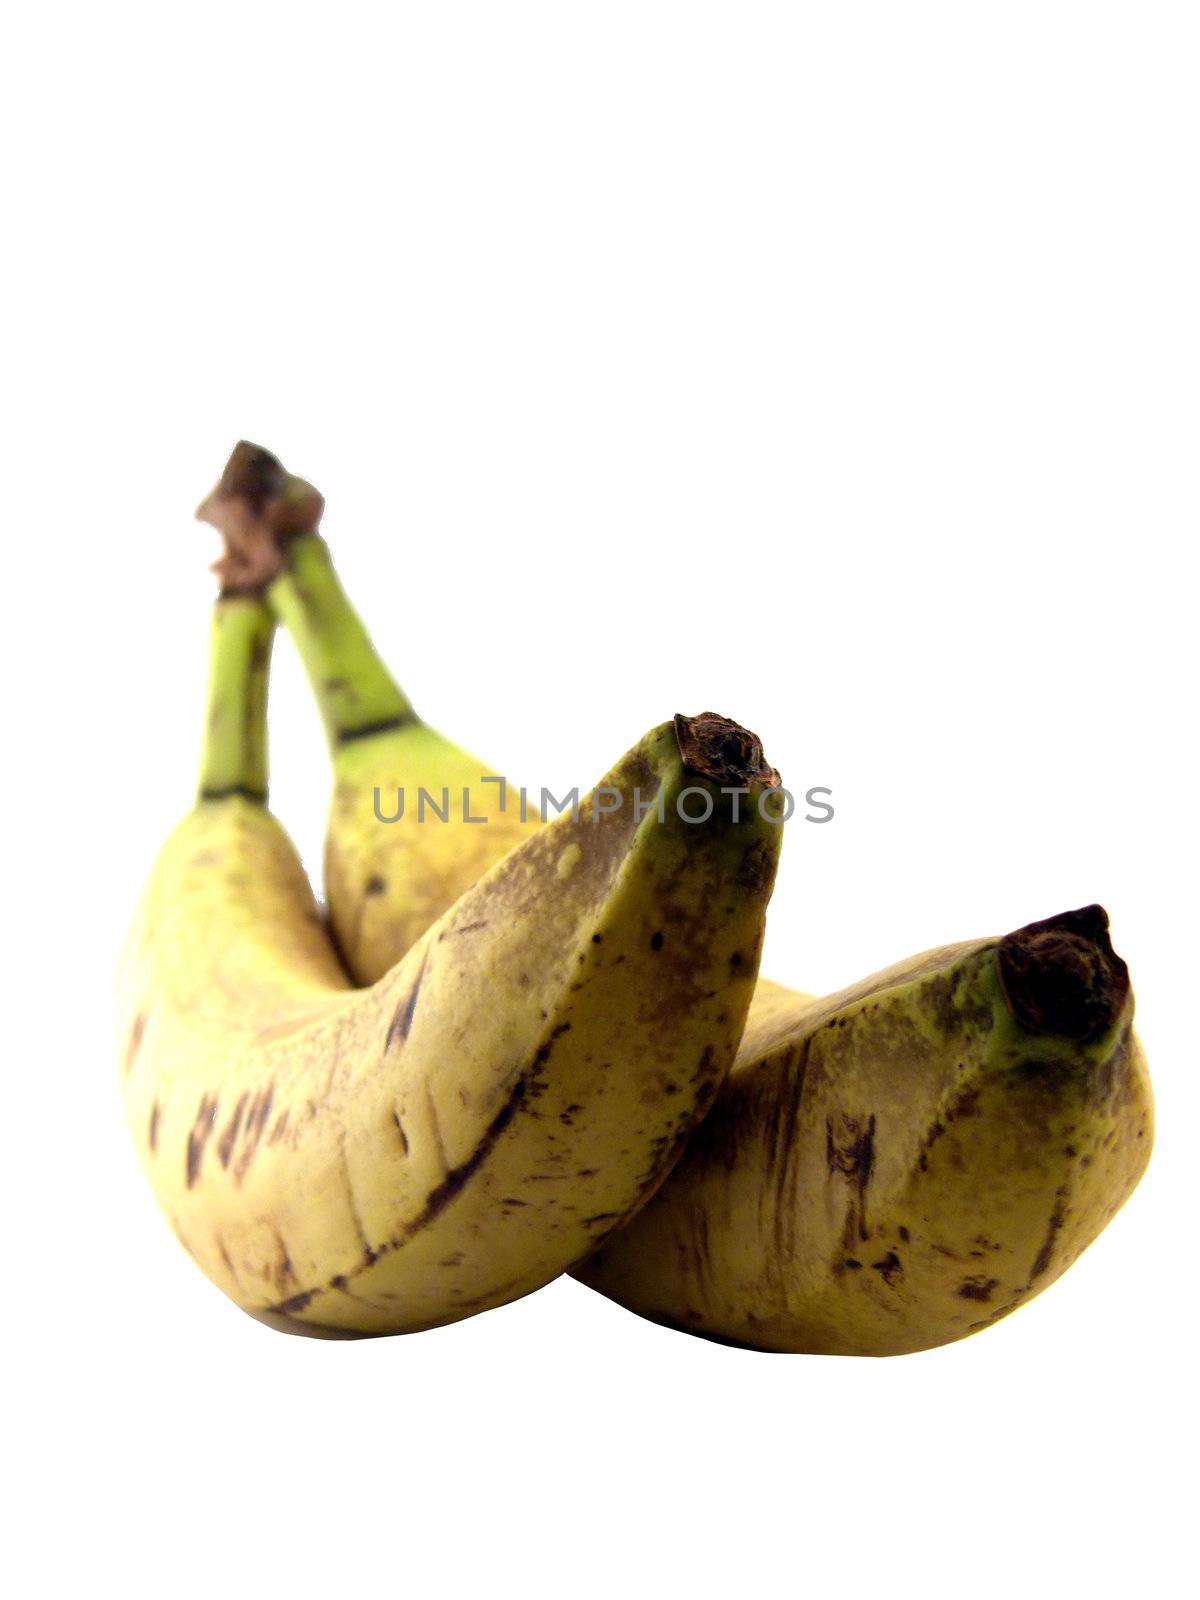 portrait of two old bananas over white background